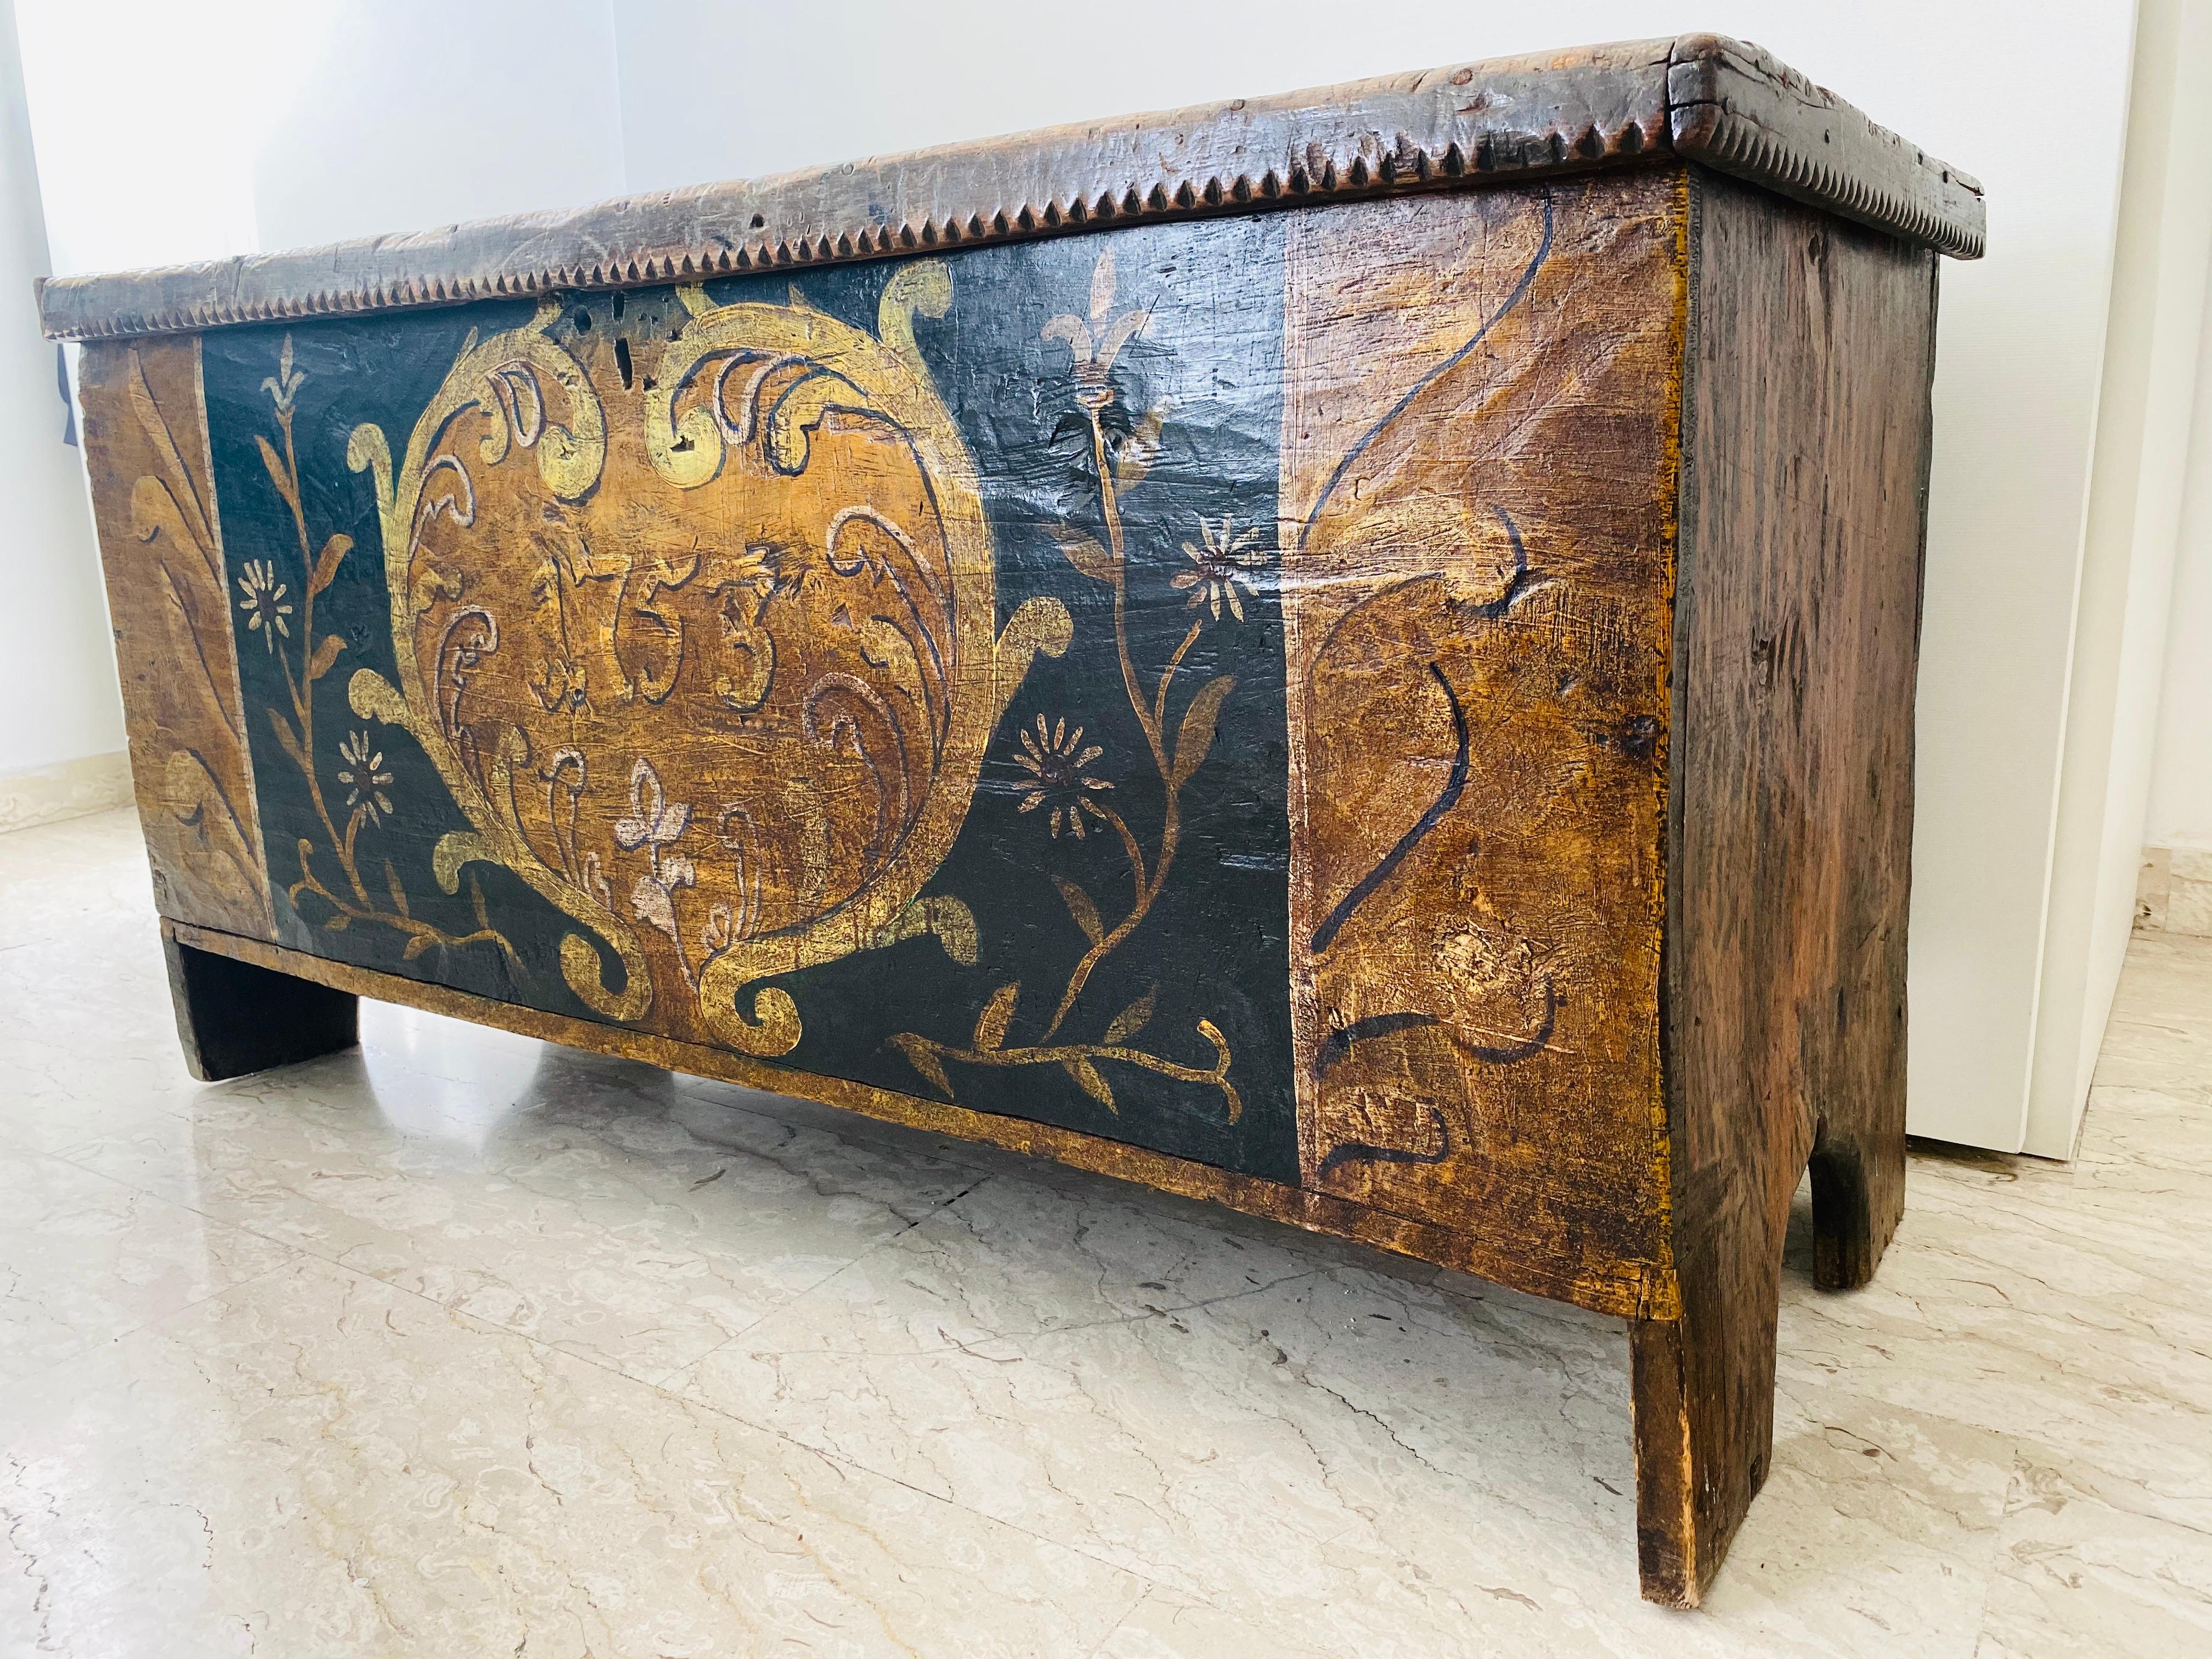 Baroque Gorgeous Antique Italian Wooden Case, 18th Century 'Year 1753' For Sale